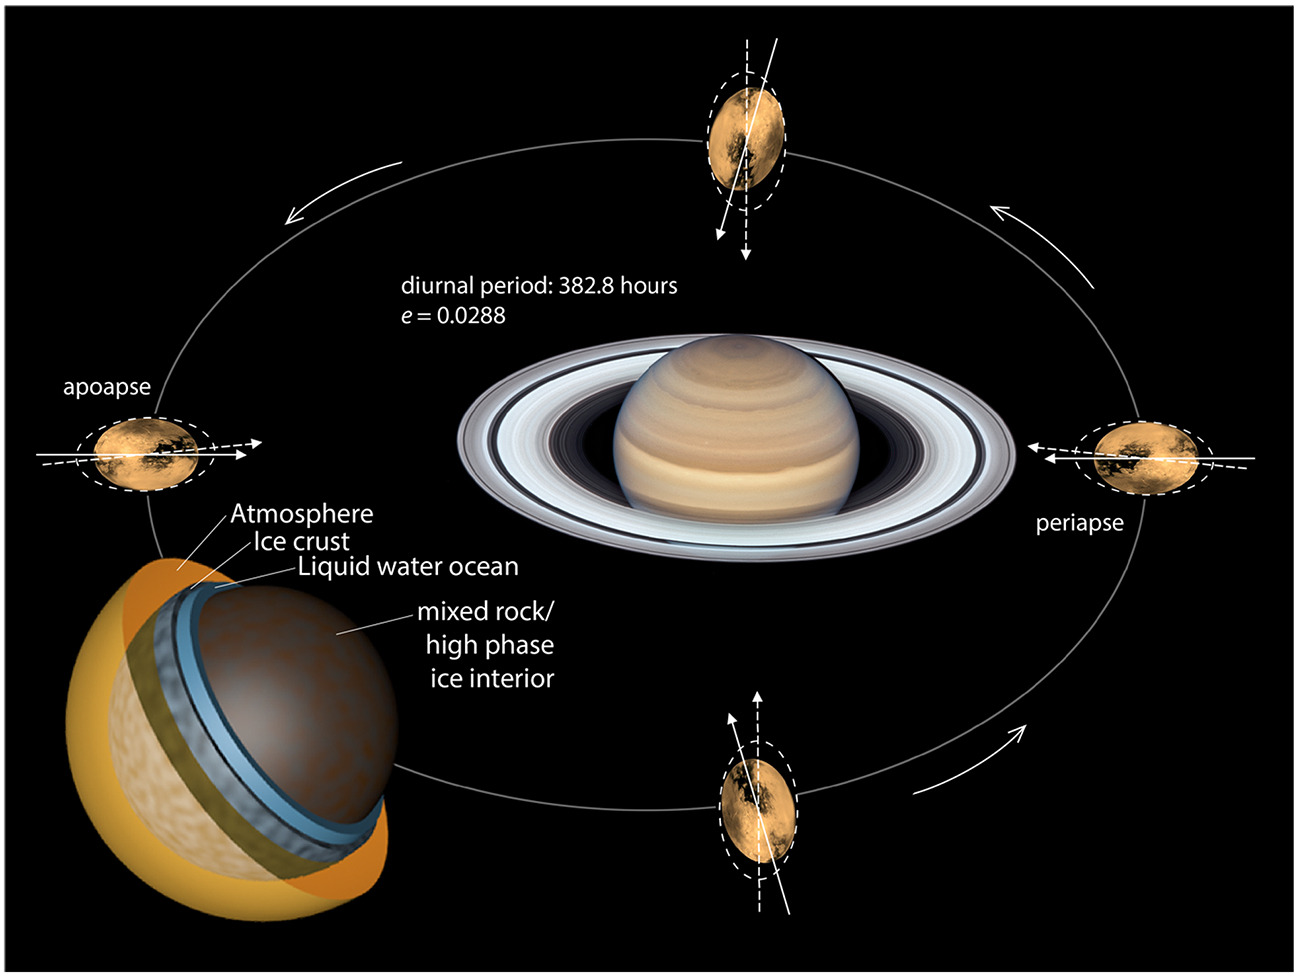 Because of Titan’s eccentric orbit, variations in gravitational tidal forces directed toward Saturn (dashed arrows) act to deform the surface.